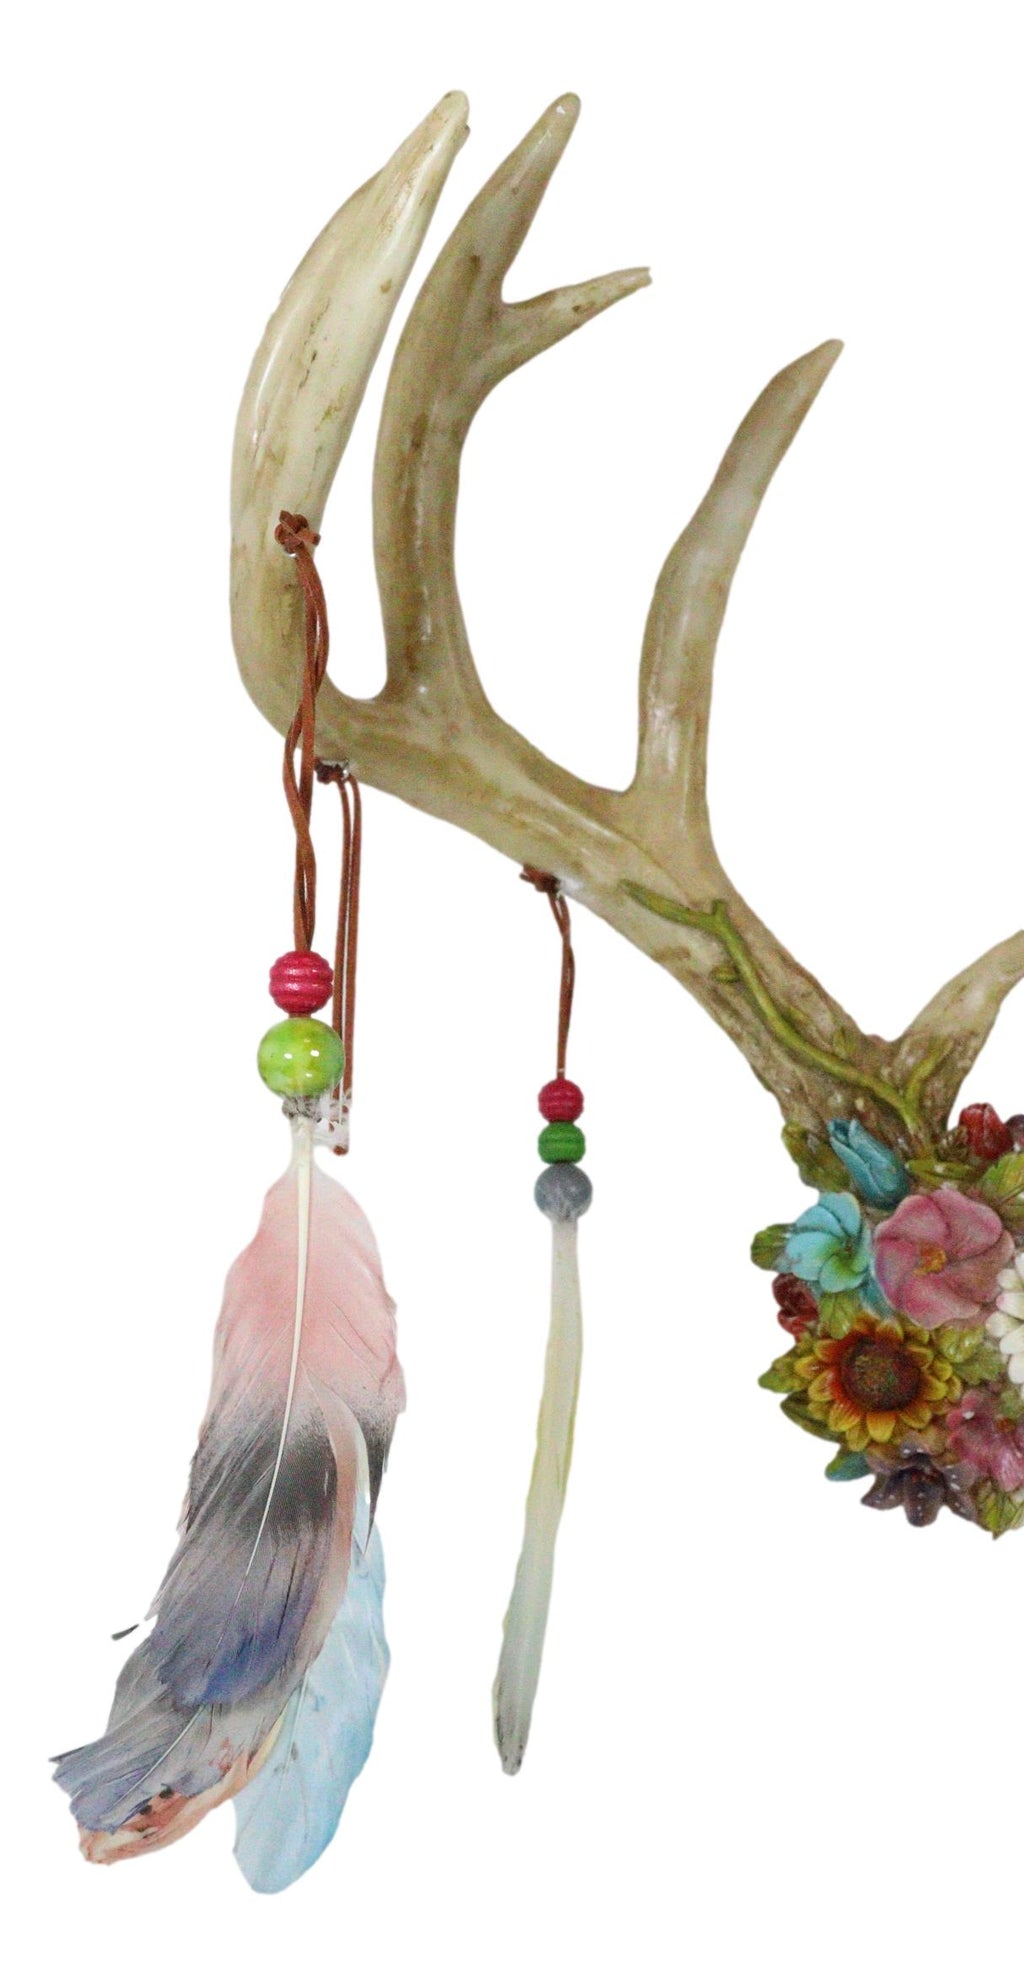 Rustic 12 Point Stag Deer Antlers Flowers And Feathers Rack Wall